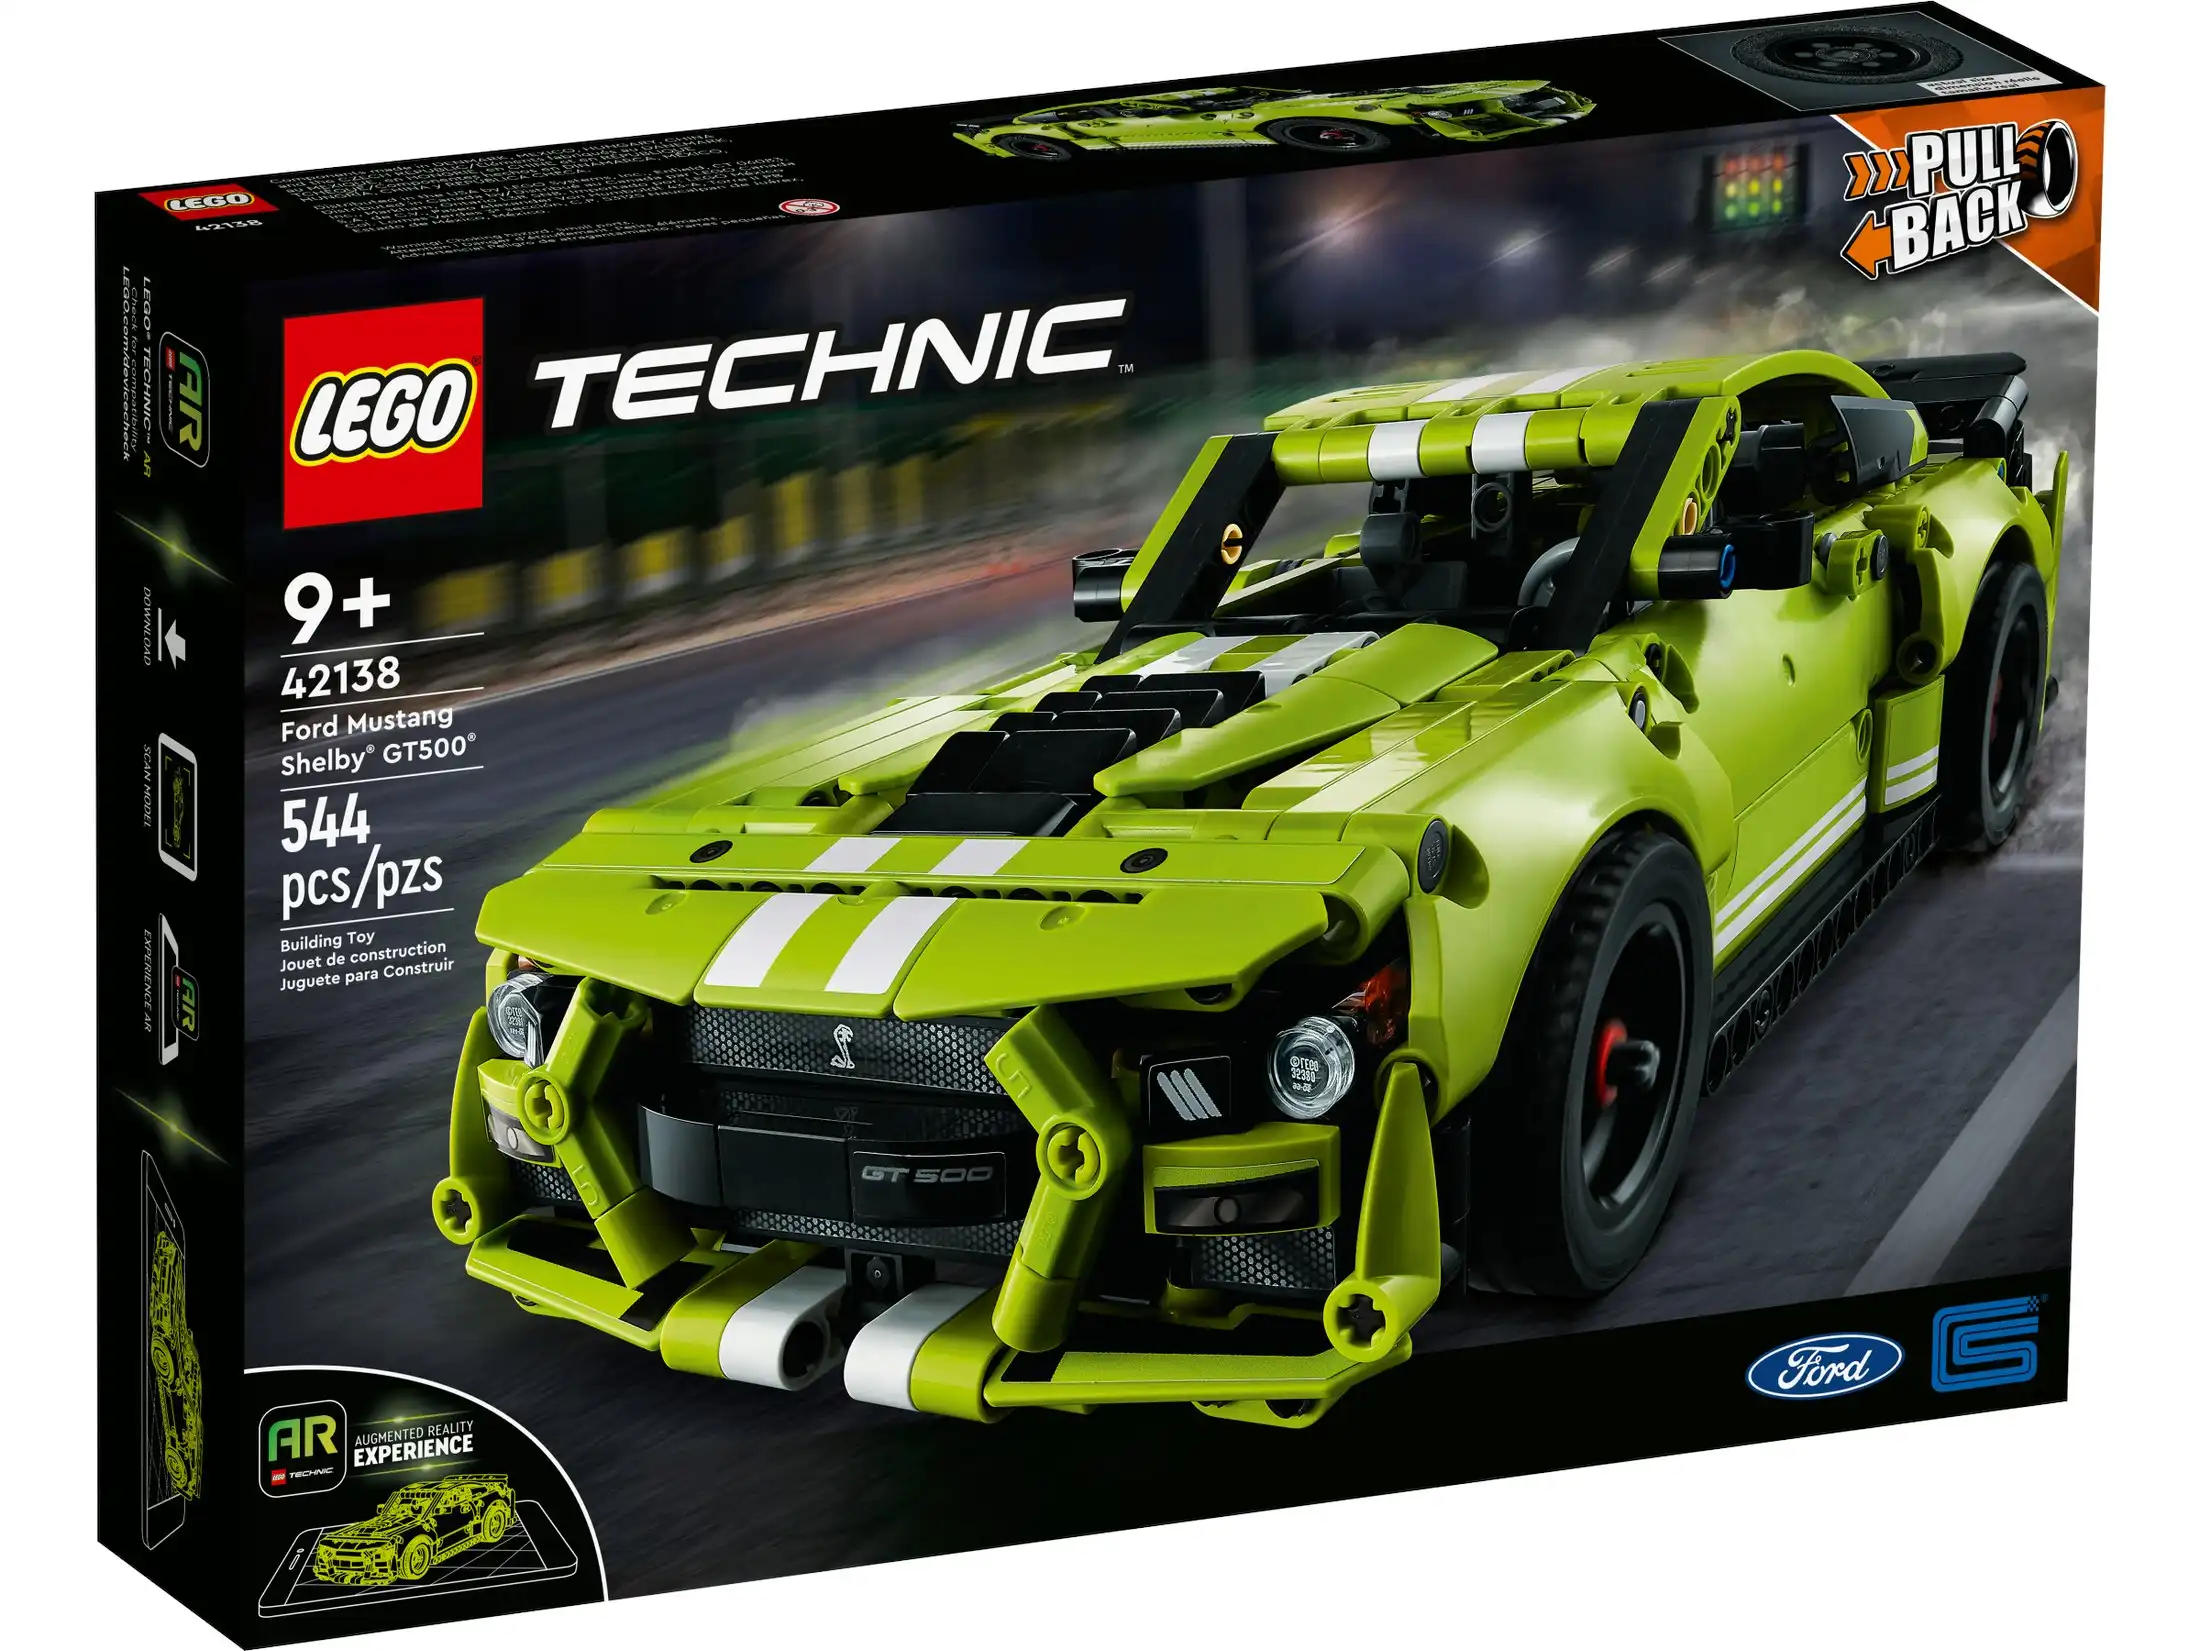 LEGO 42138 Ford Mustang Shelby GT500 - Technic